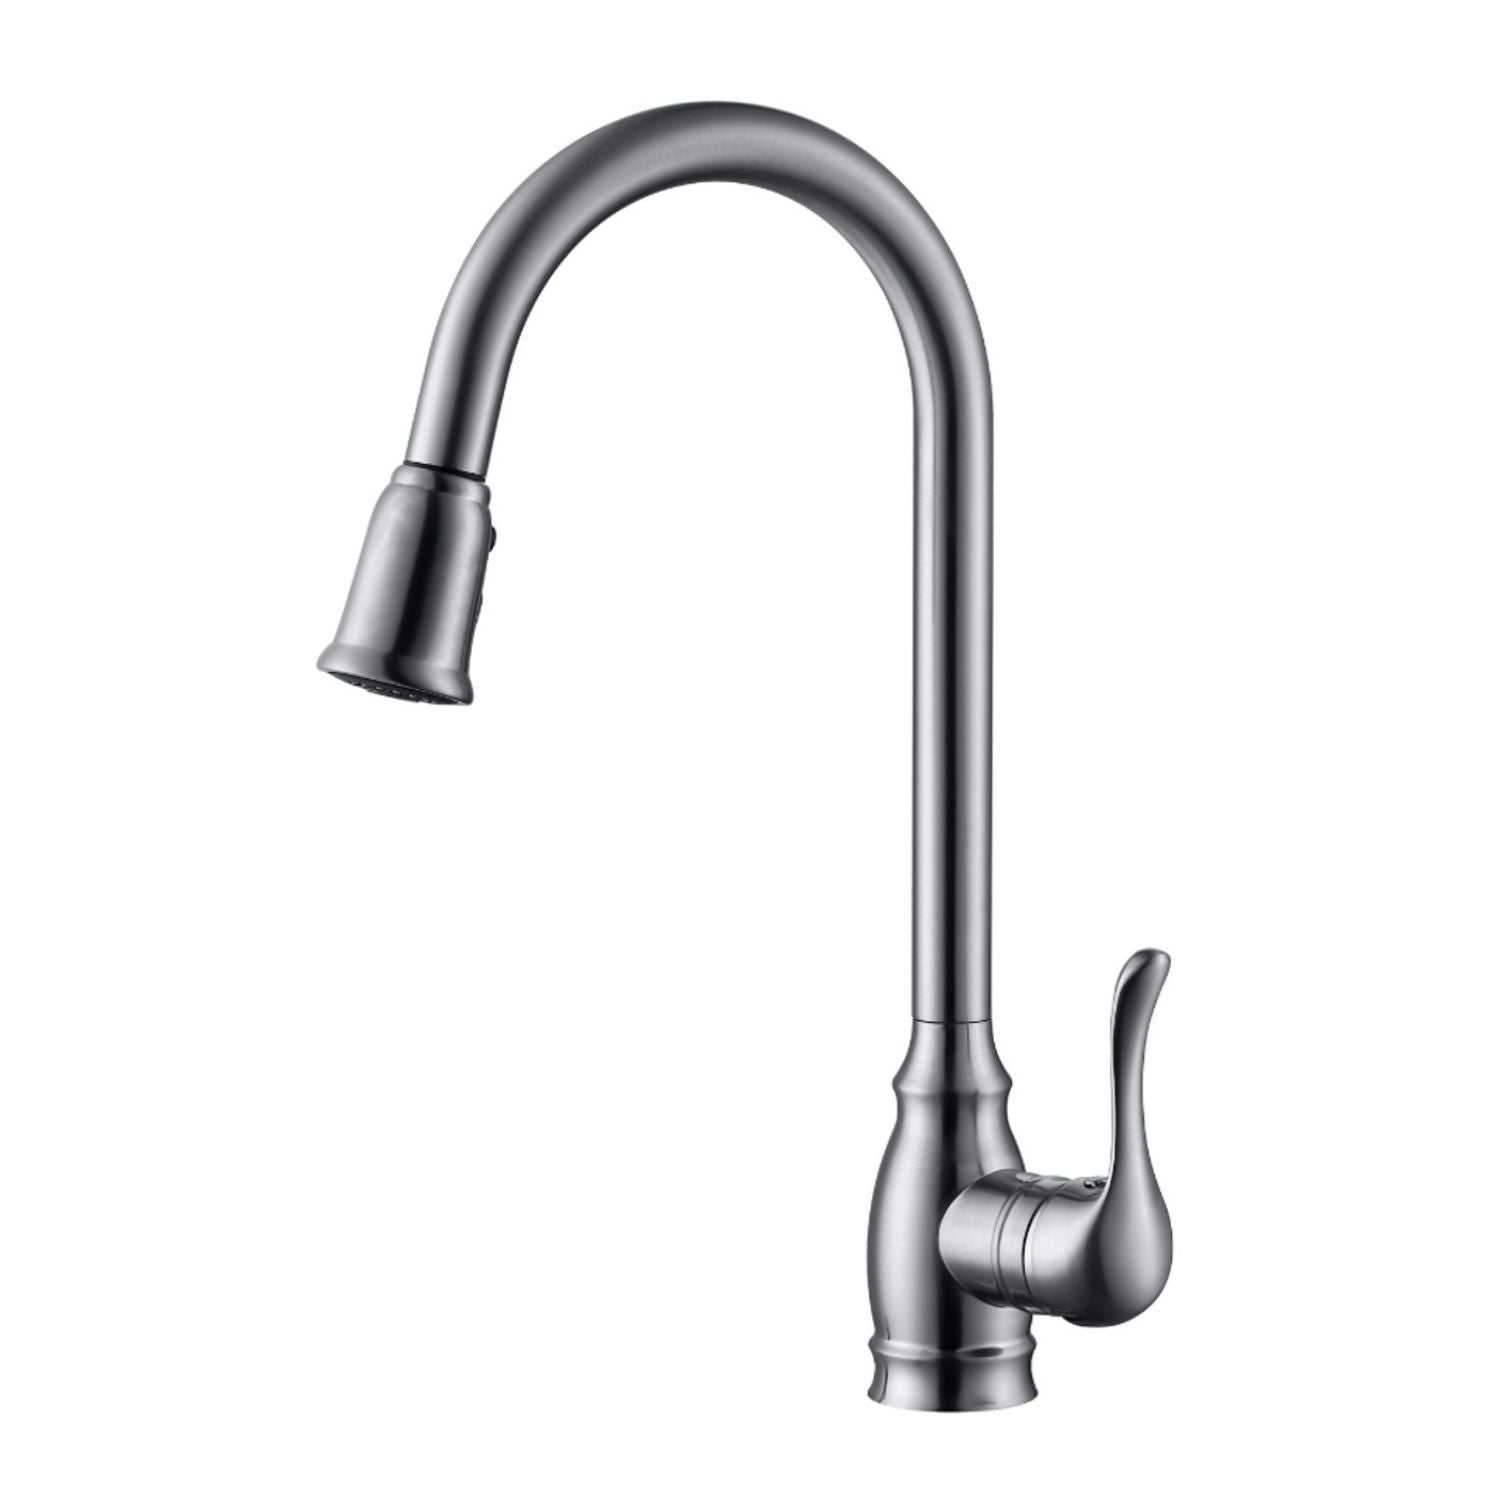 Duko FC805102-BN Stainless Steel Kitchen Single Handle Faucet in Brushed Nickel Finish